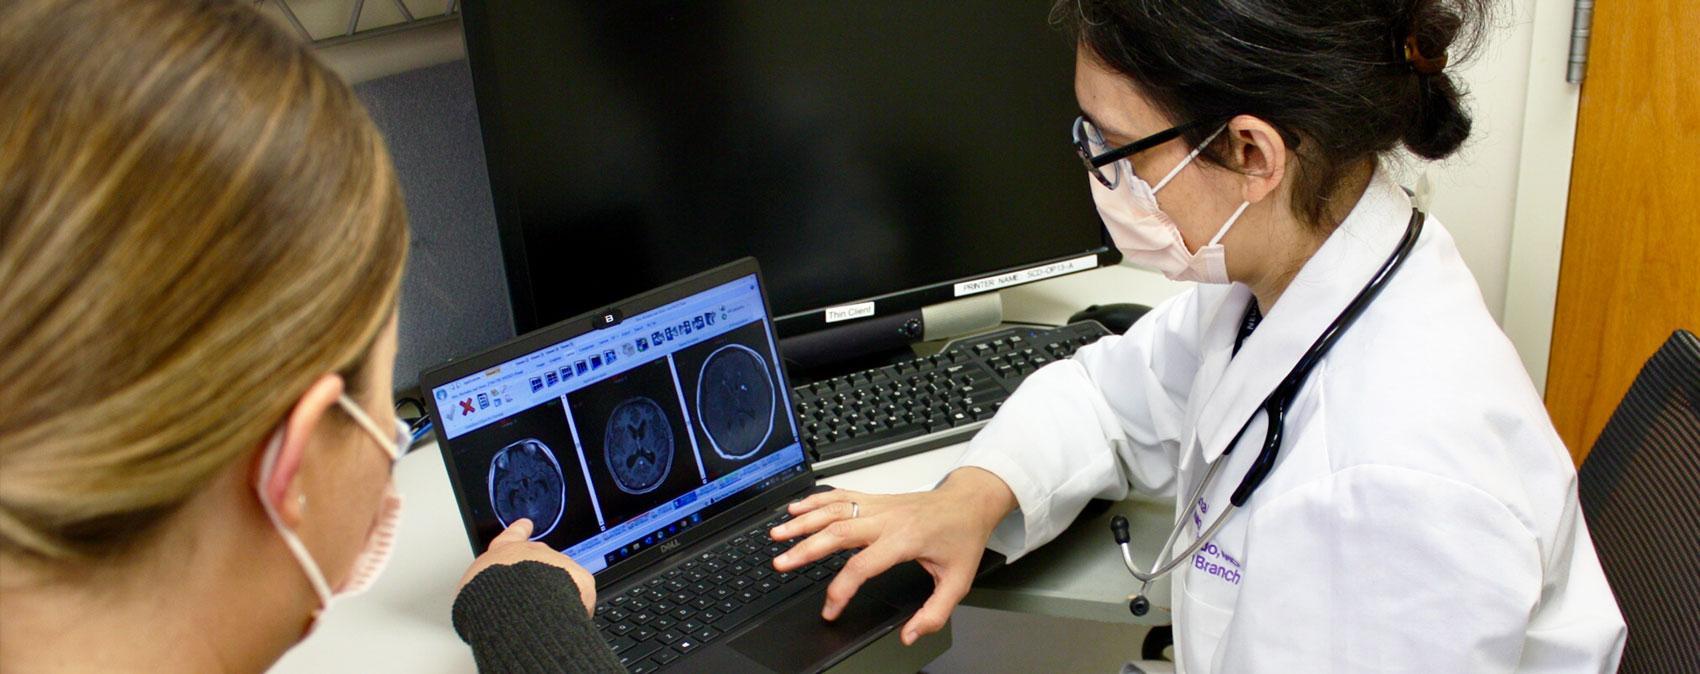 Doctor and patient wearing face masks and seated at a computer looking at brain MRI scans